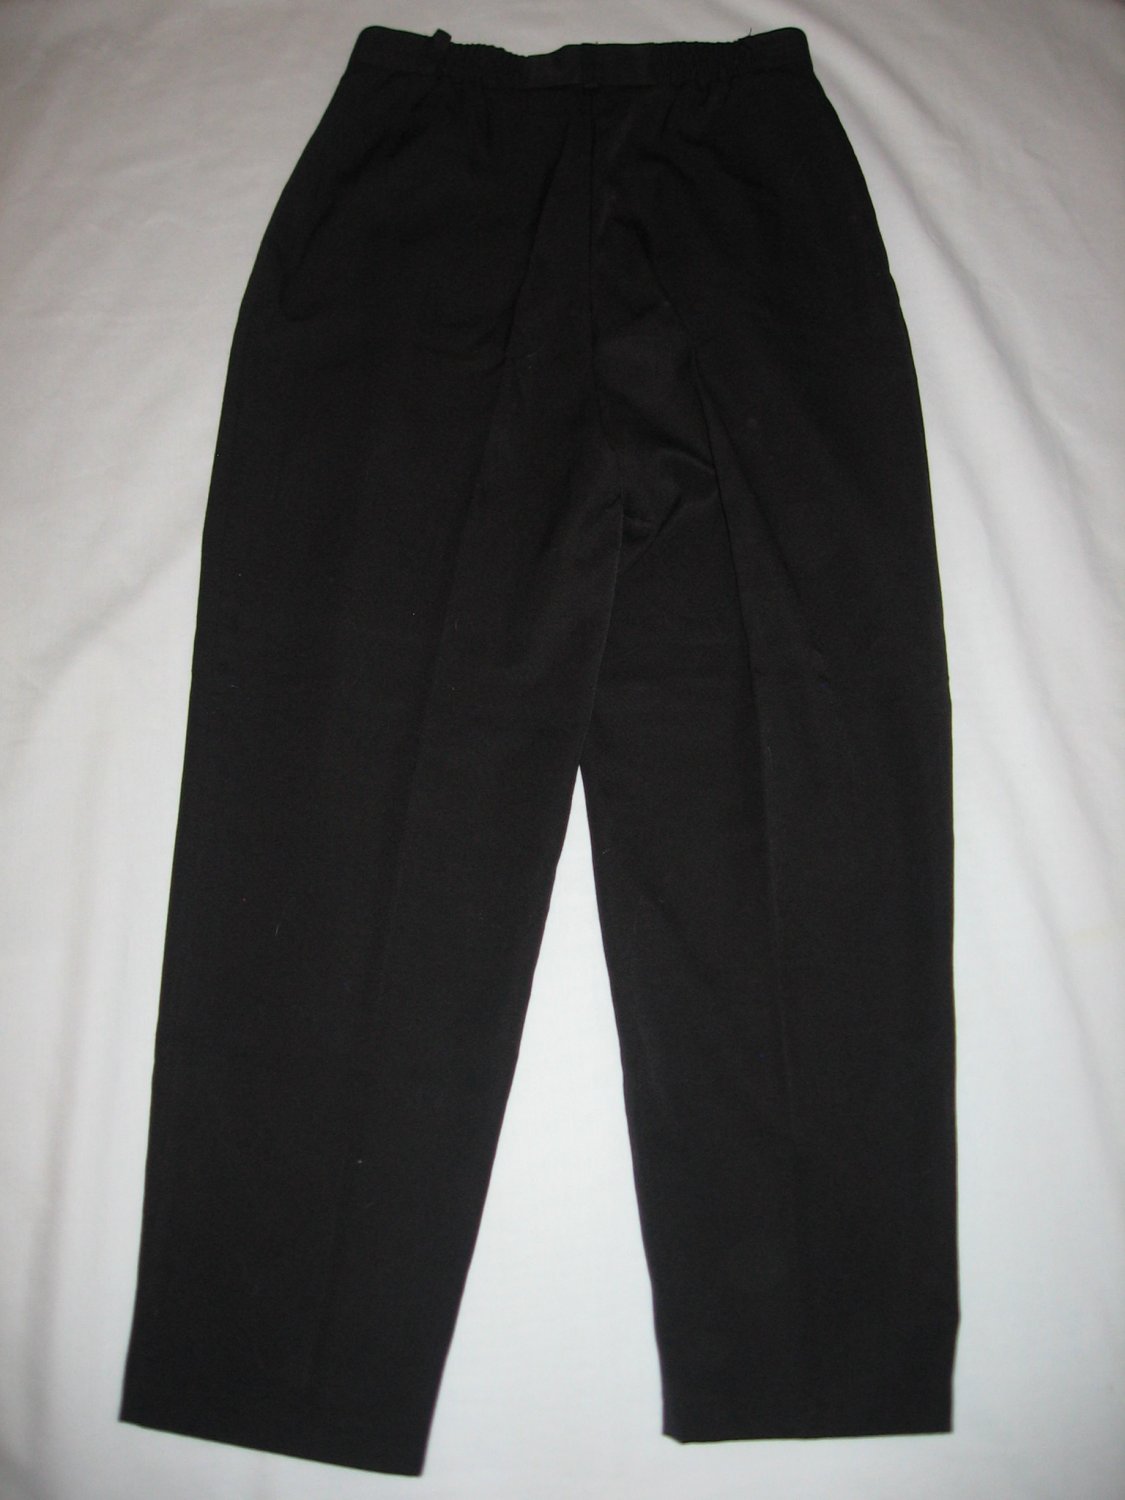 SK and Company Black Pleated Dress Pants Womens Size 8 Petite